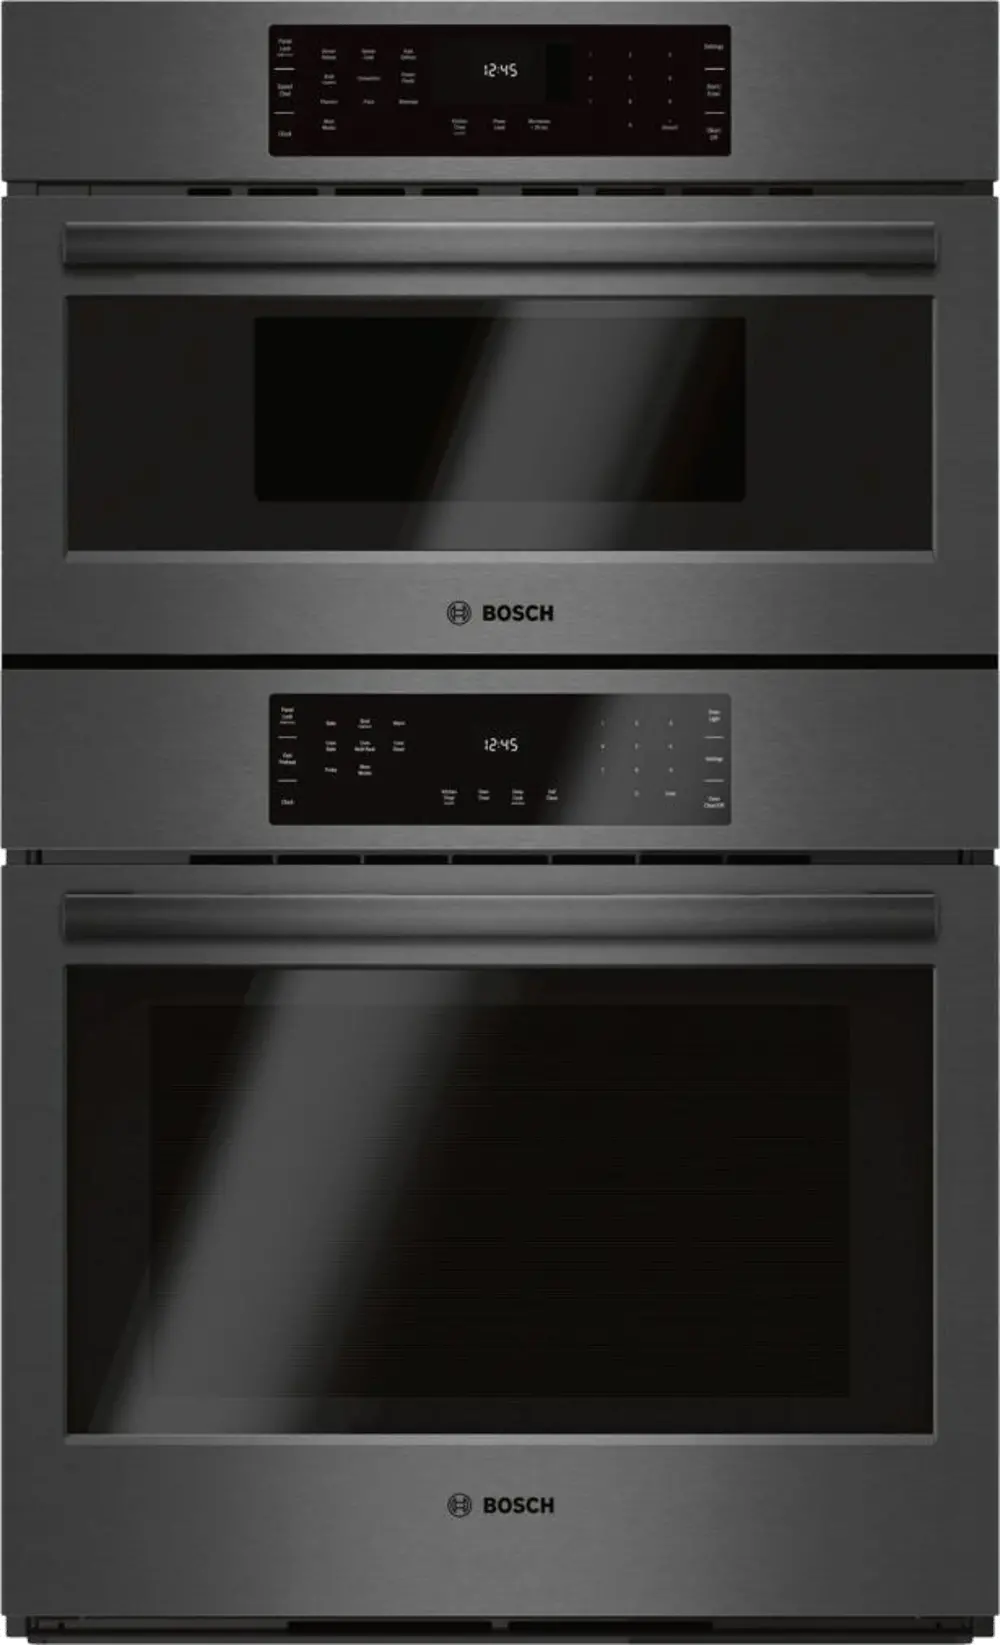 HBL8742UC Bosch 30 Inch Combination Wall Oven with Speed Oven - Black Stainless Steel-1